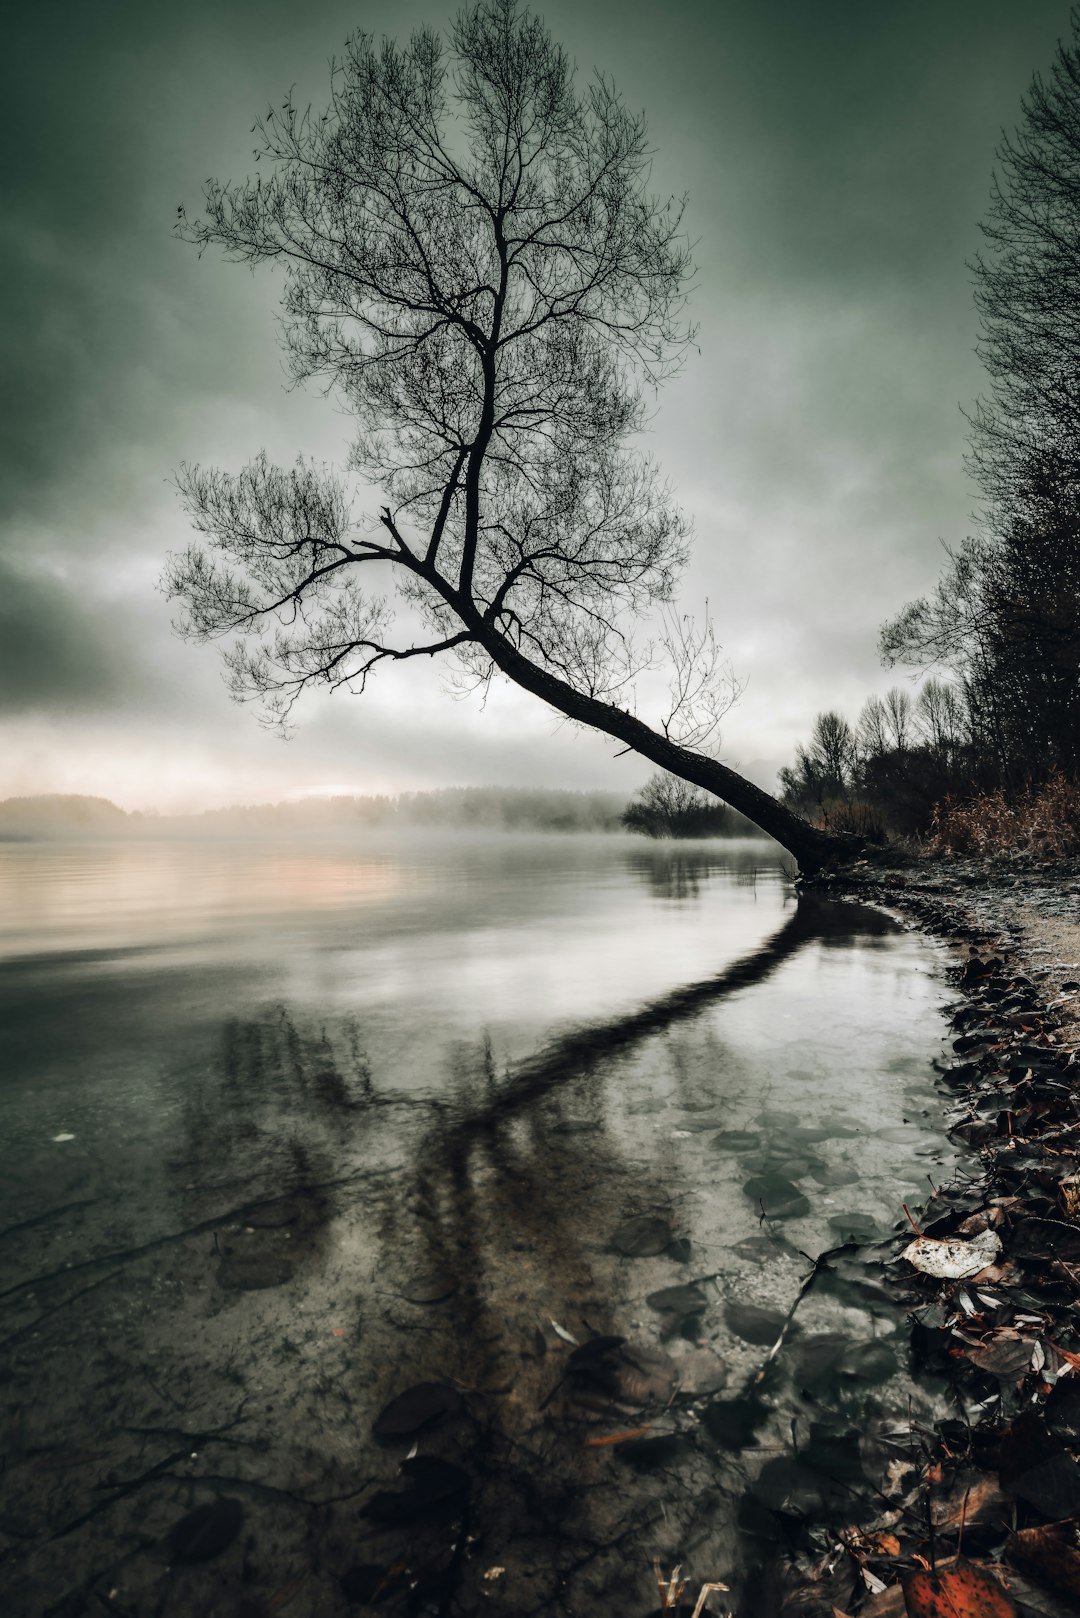 grayscale photo of tree beside body of water